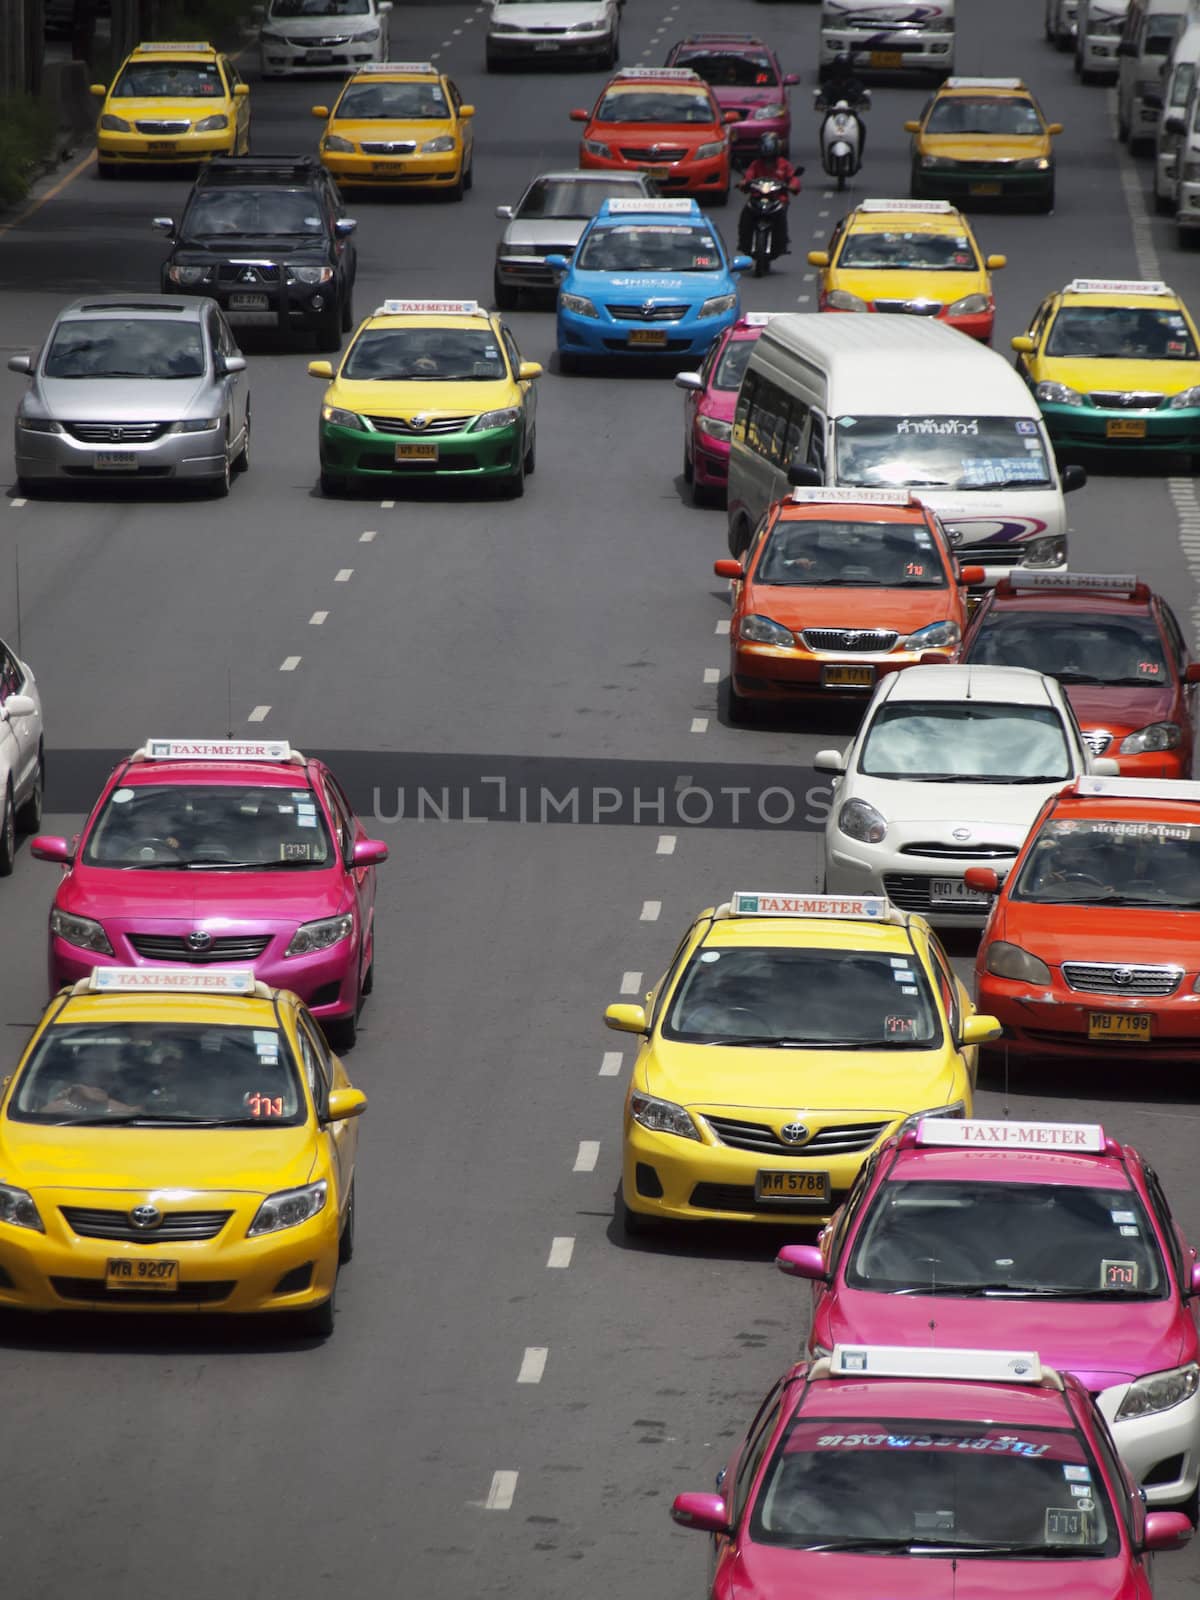 14 July 2012: Bangkok, Thailand. Colorful taxis driving in the city of Bangkok in Thailand